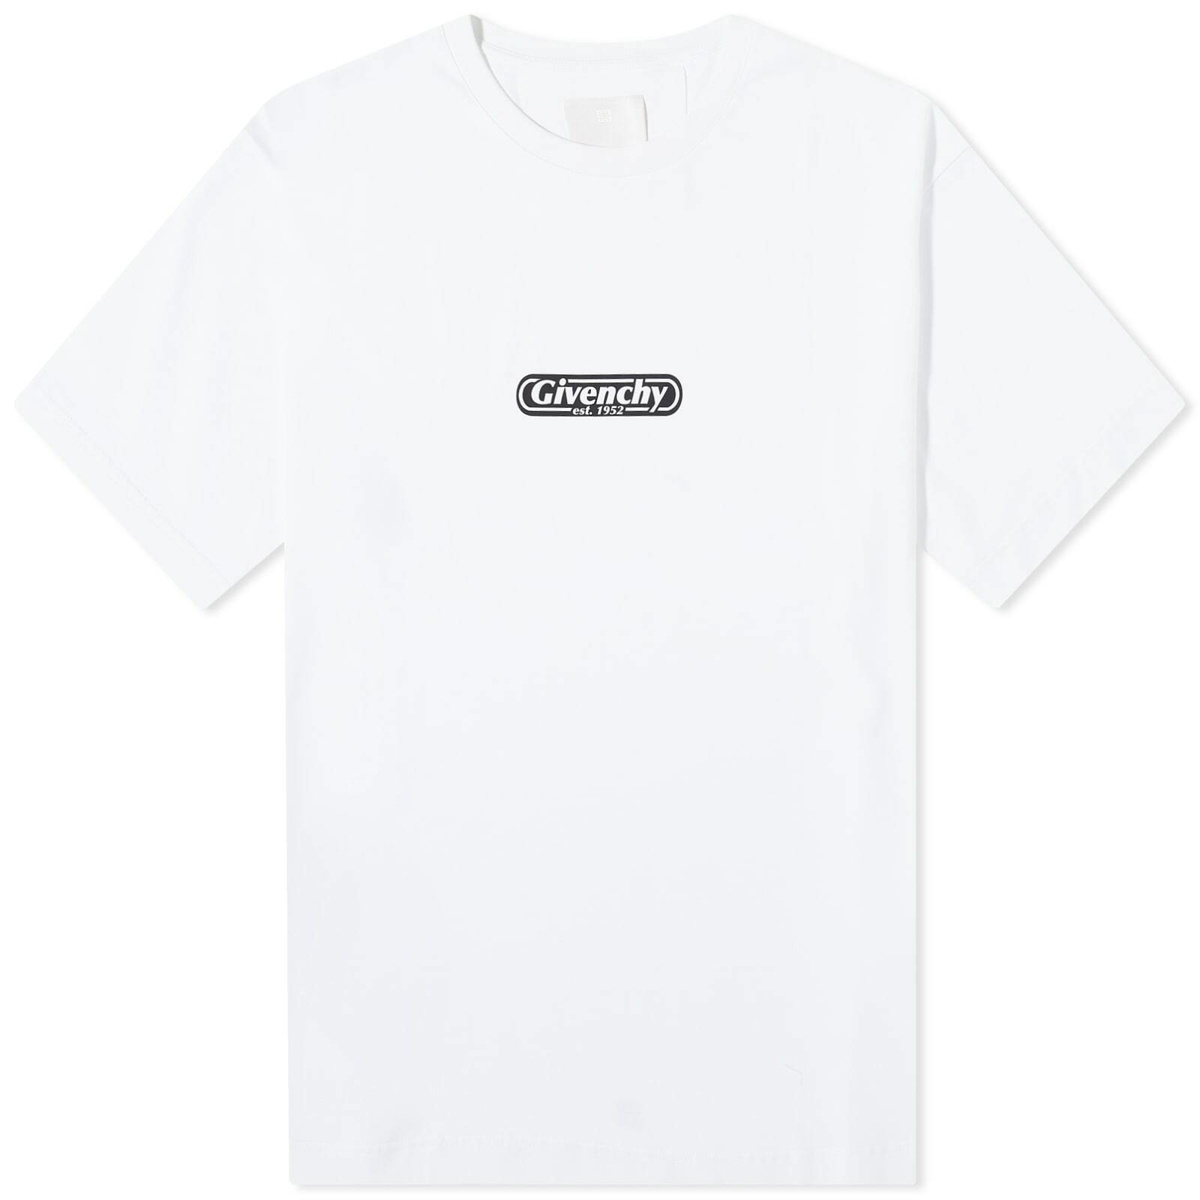 Givenchy Men's Est.1952 Logo T-Shirt in White Givenchy